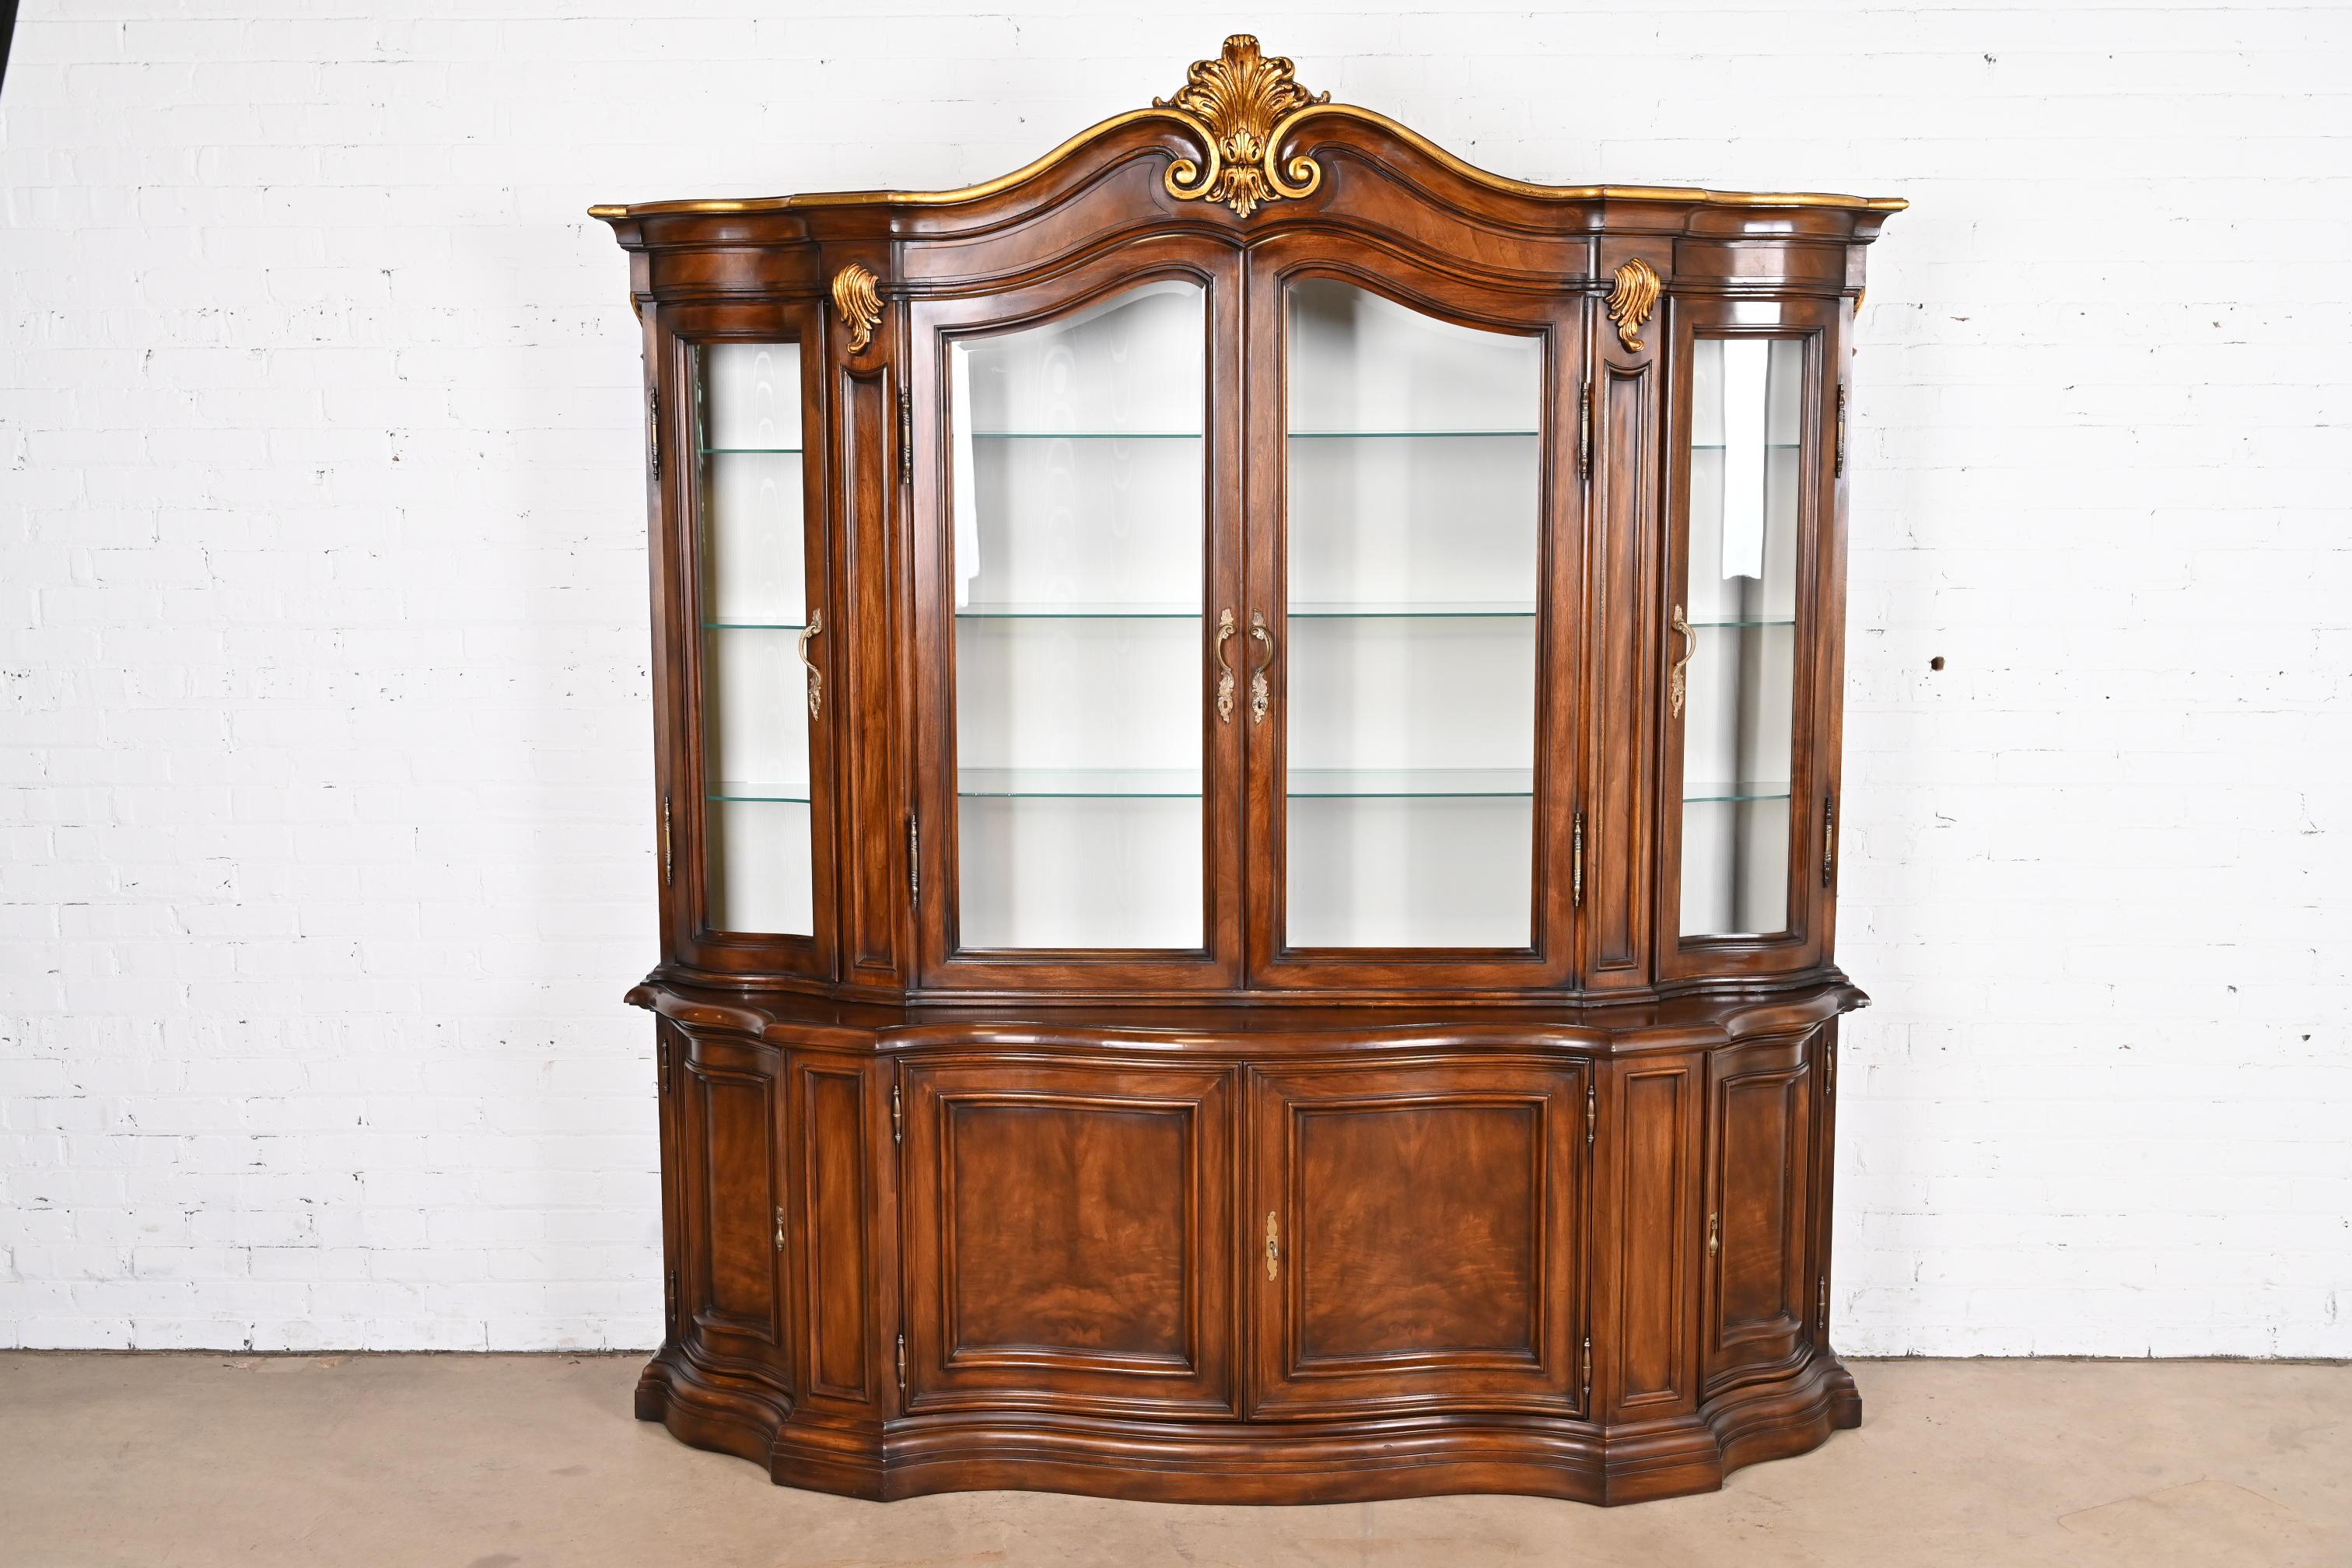 A gorgeous French Provincial Louis XV style lighted breakfront bookcase or dining cabinet

By Karges Furniture

USA, Circa 1980s

Carved burled walnut, with gold gilt details, glass front doors, and original brass hardware. Cabinet locks, and key is